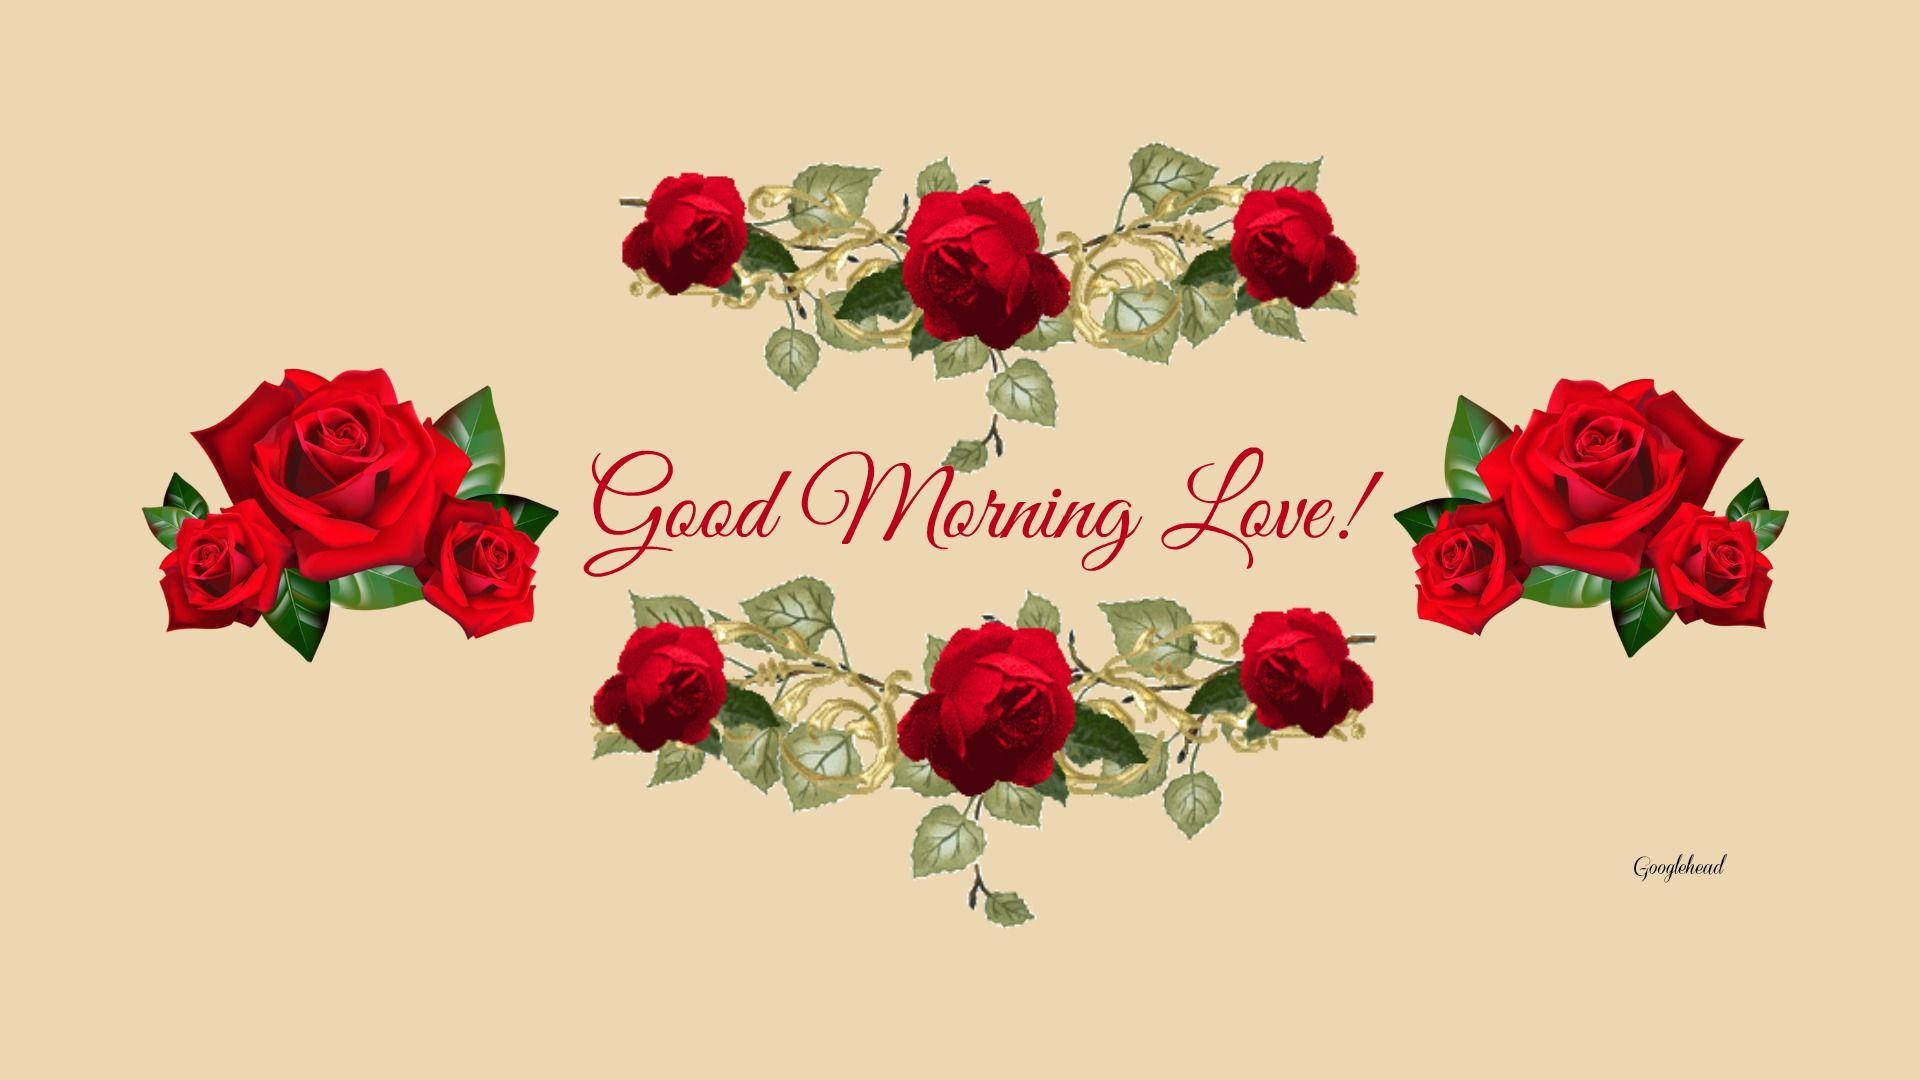 Good Morning Hd With Red Roses